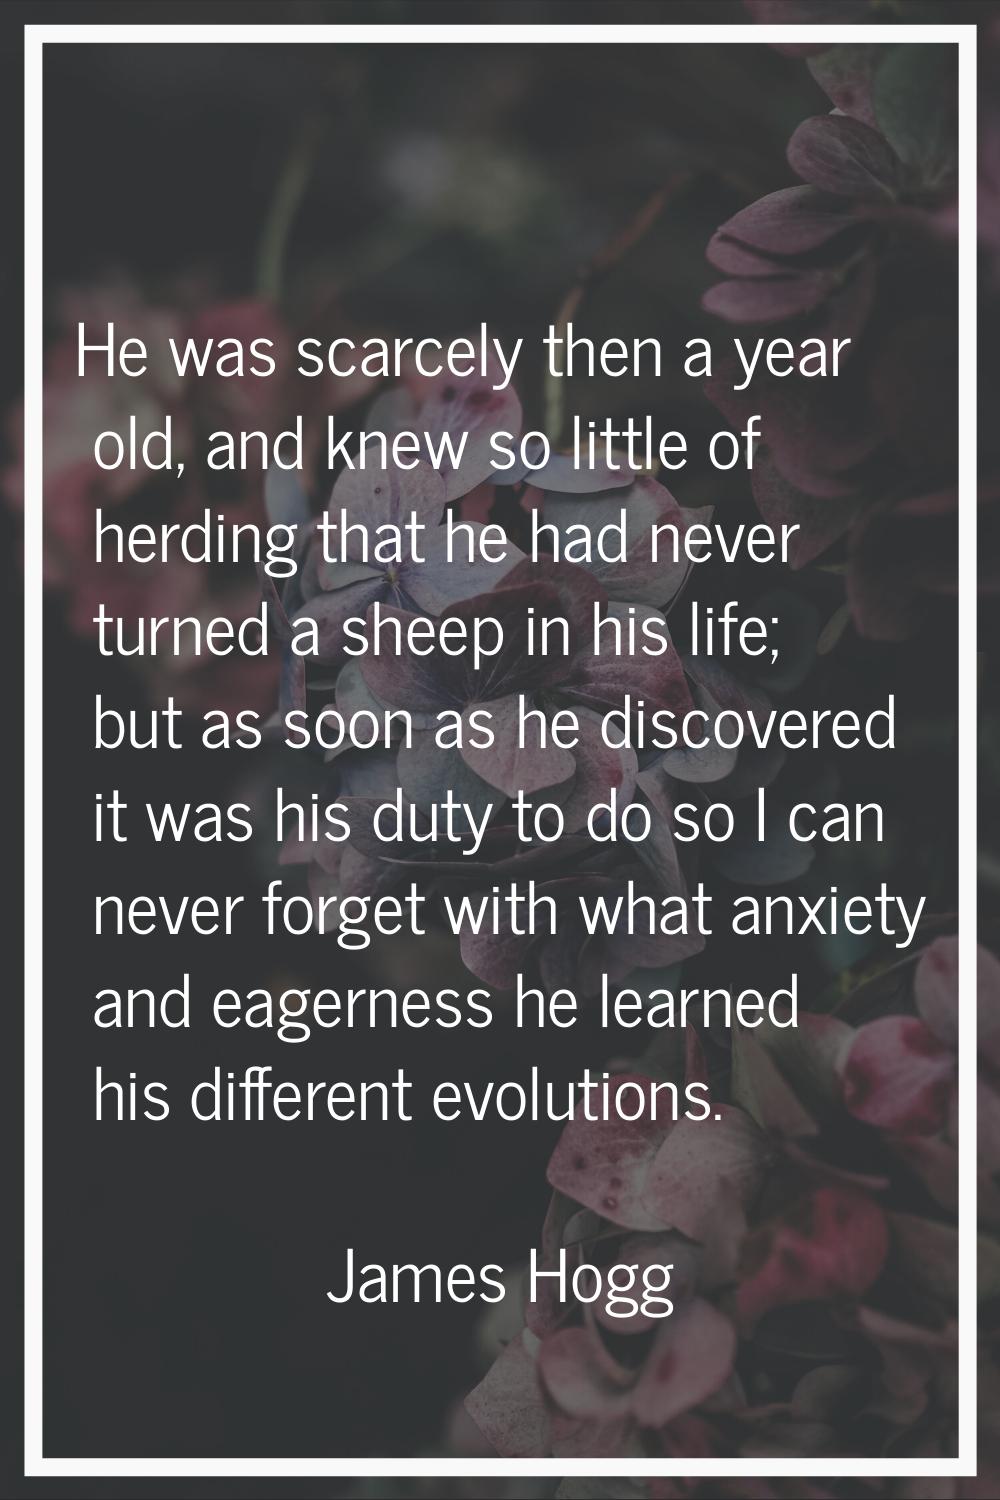 He was scarcely then a year old, and knew so little of herding that he had never turned a sheep in 